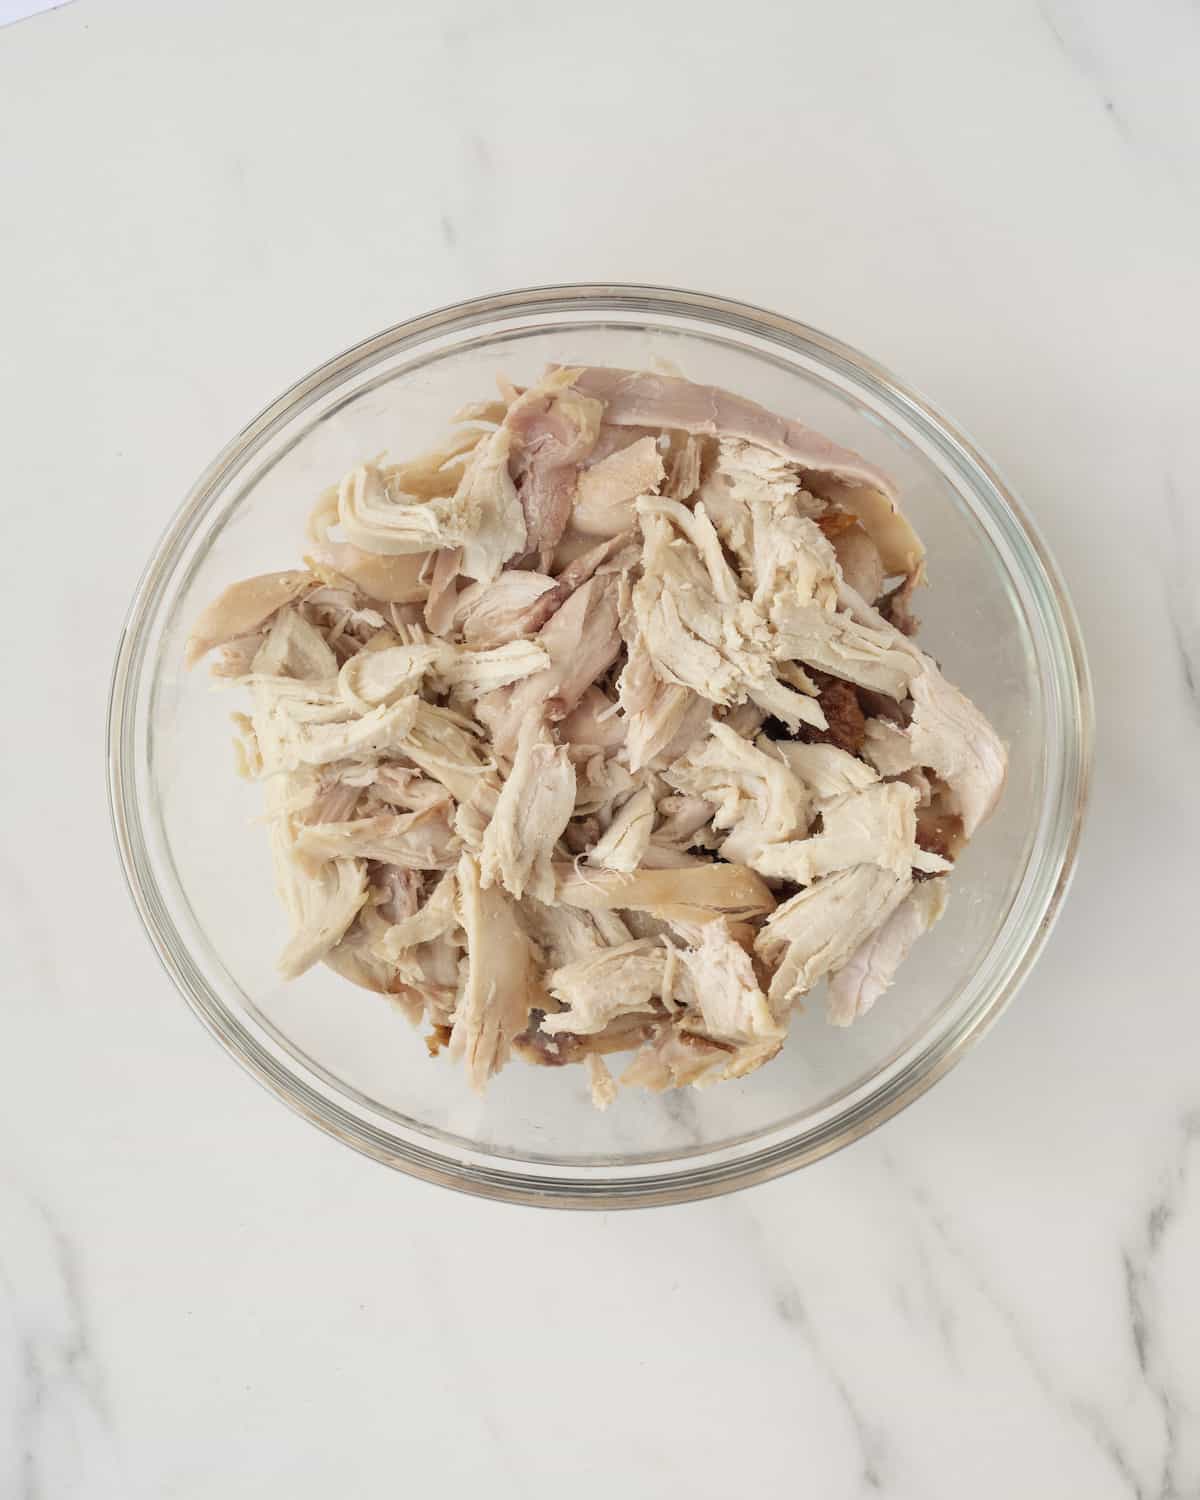 Shredded rotisserie chicken in a clear bowl on top of a white countertop.